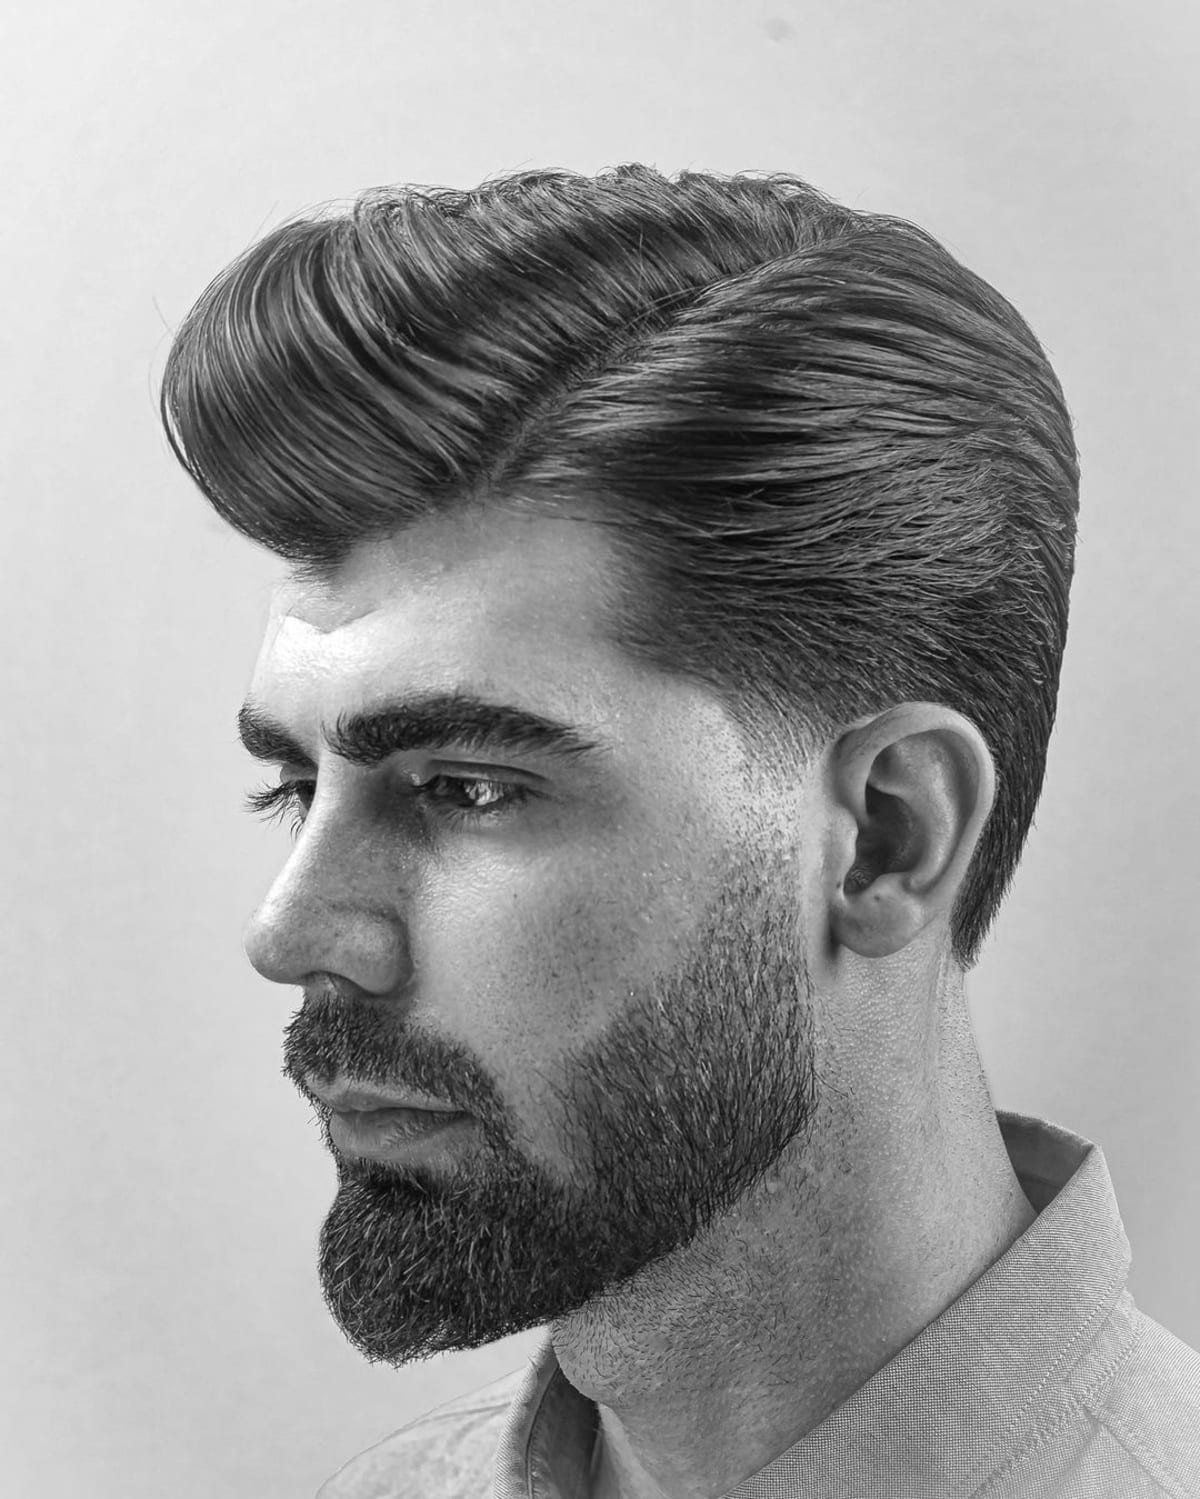 25 Handsome Side Part Haircut Styles For Men in 2023 | Side part mens  haircut, Men haircut styles, Haircuts for men